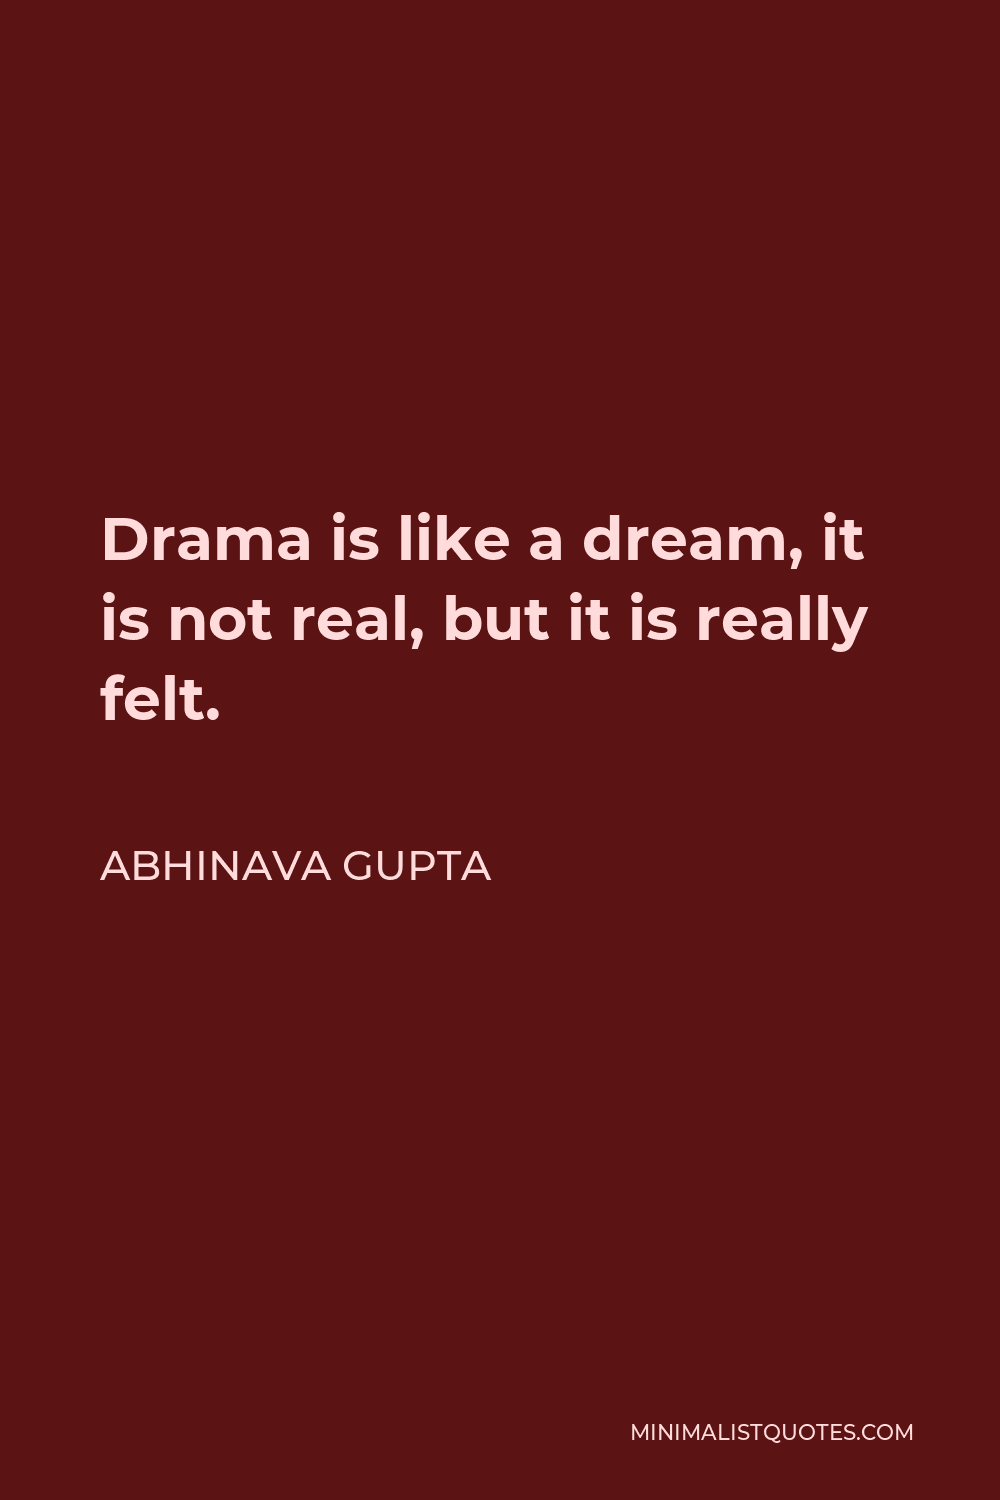 Abhinava Gupta Quote - Drama is like a dream, it is not real, but it is really felt.